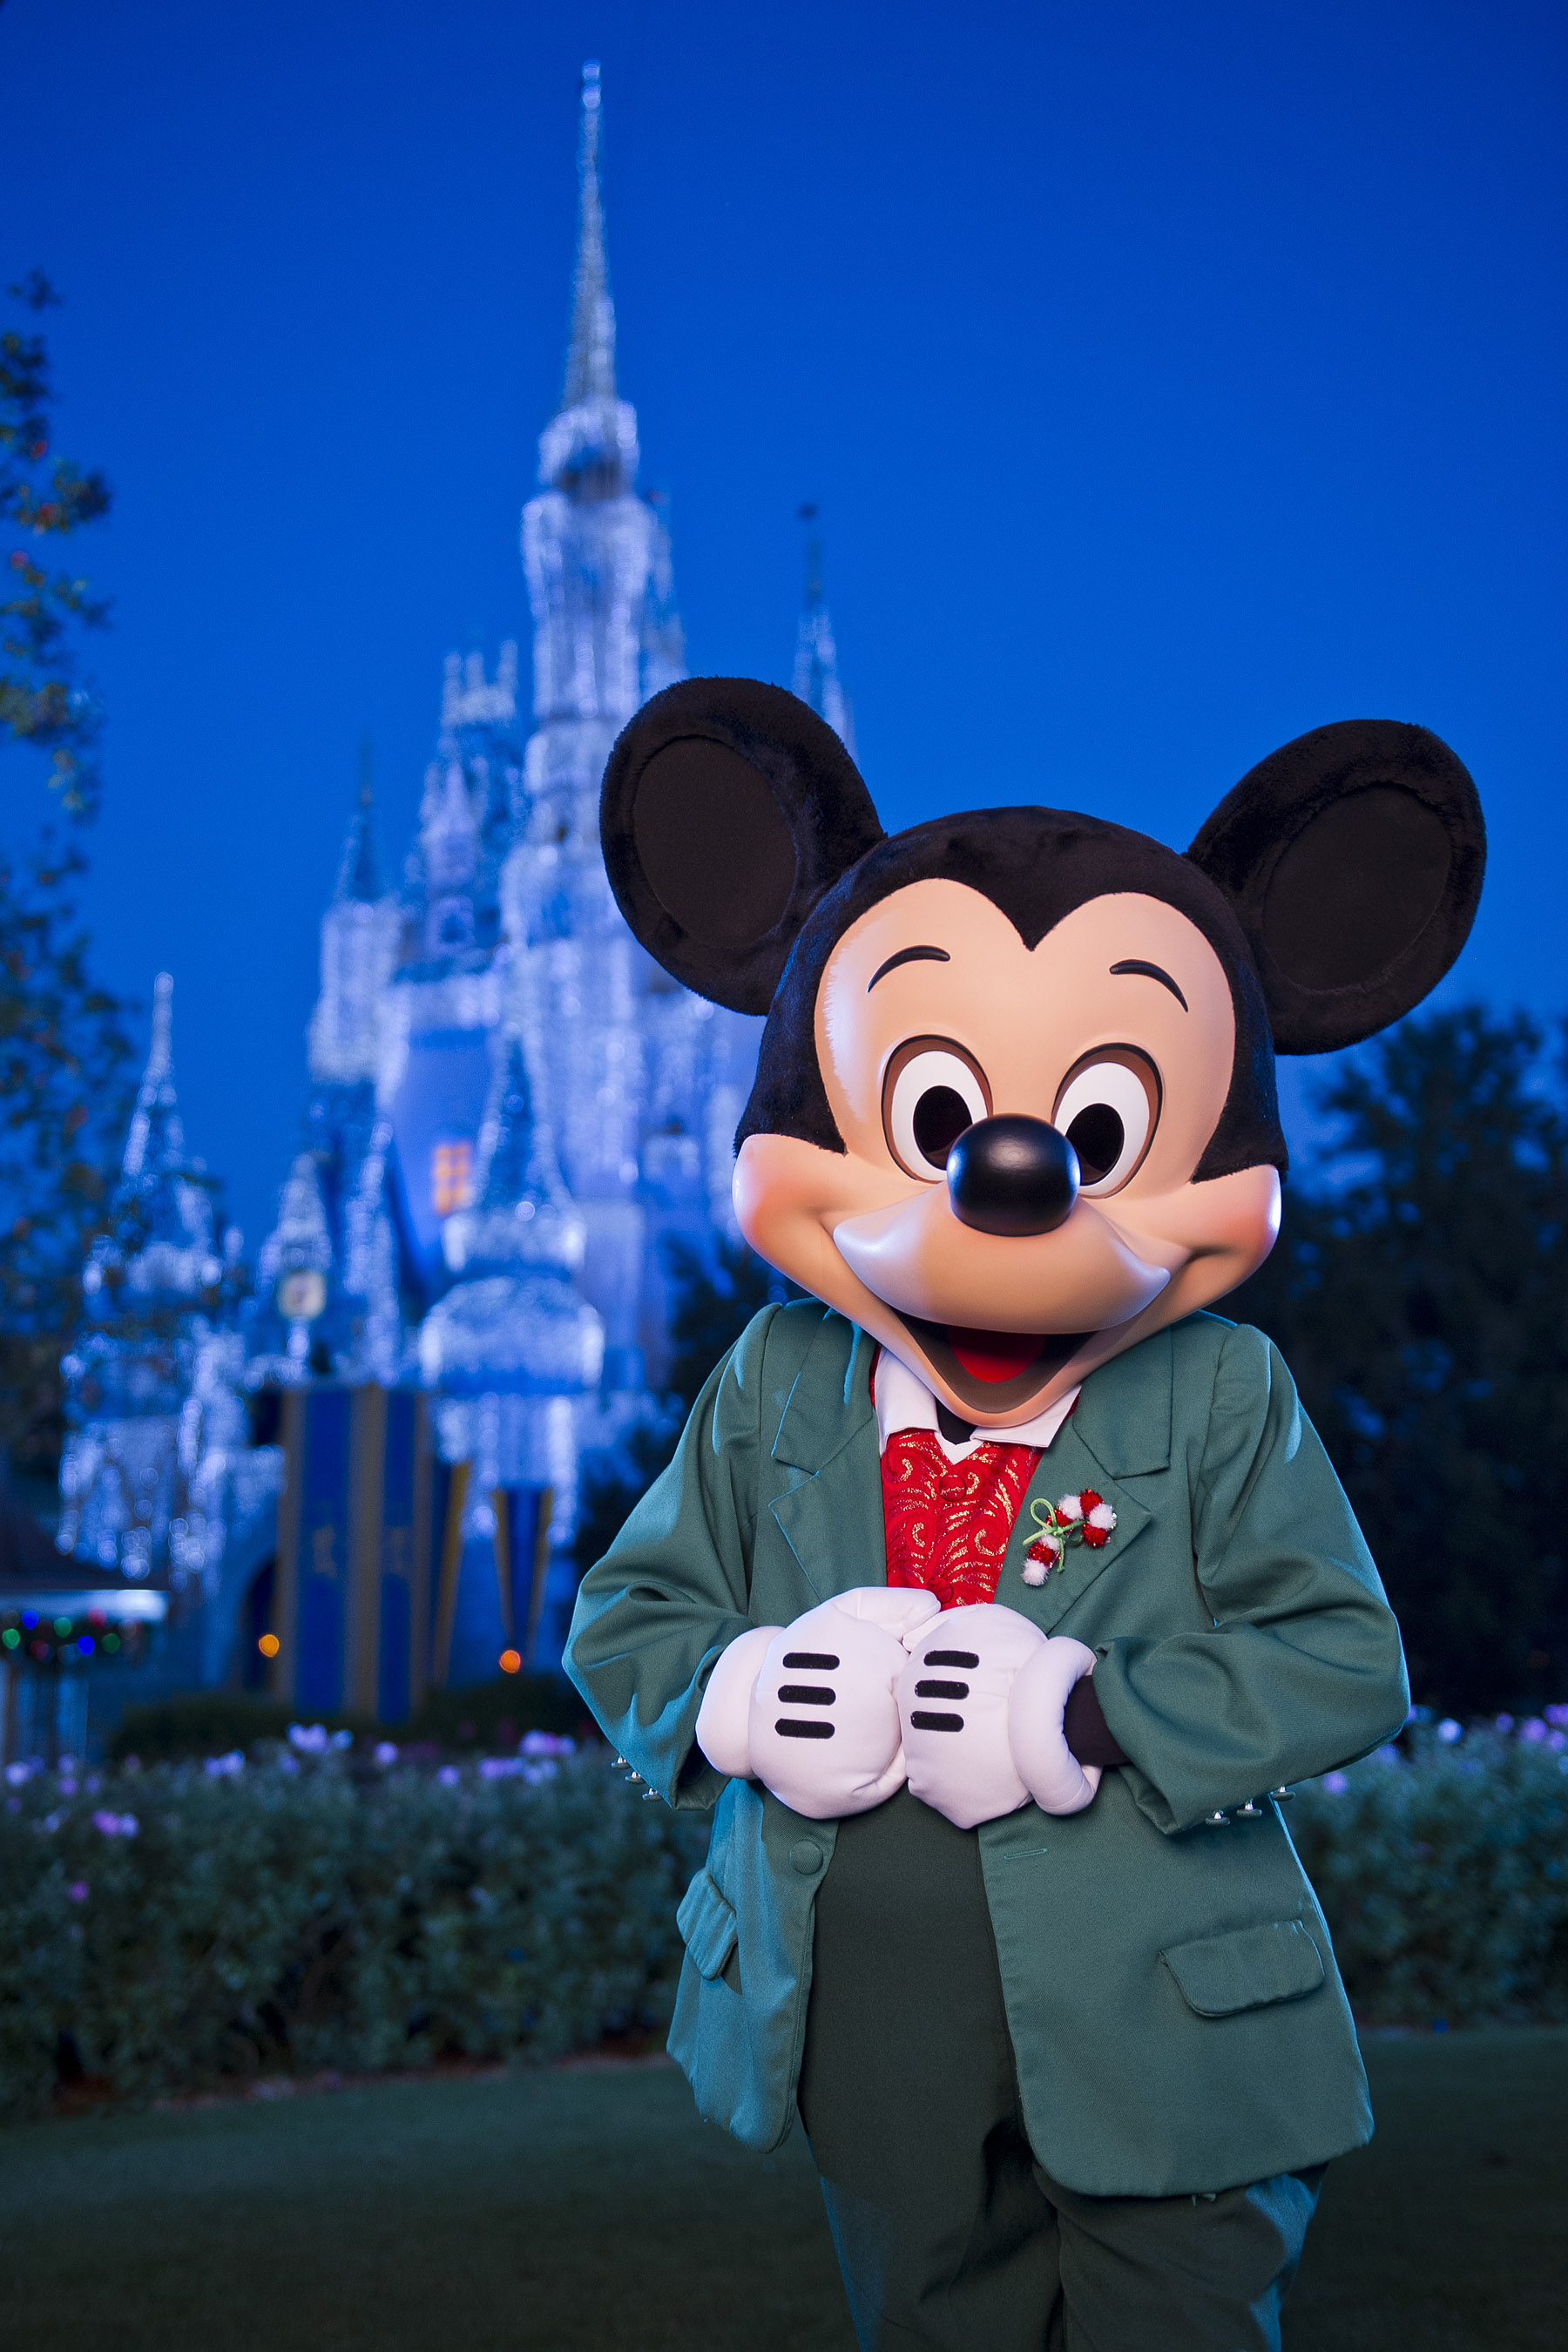 New Surprises and Traditional Classics Blend at Disney Christmas Party